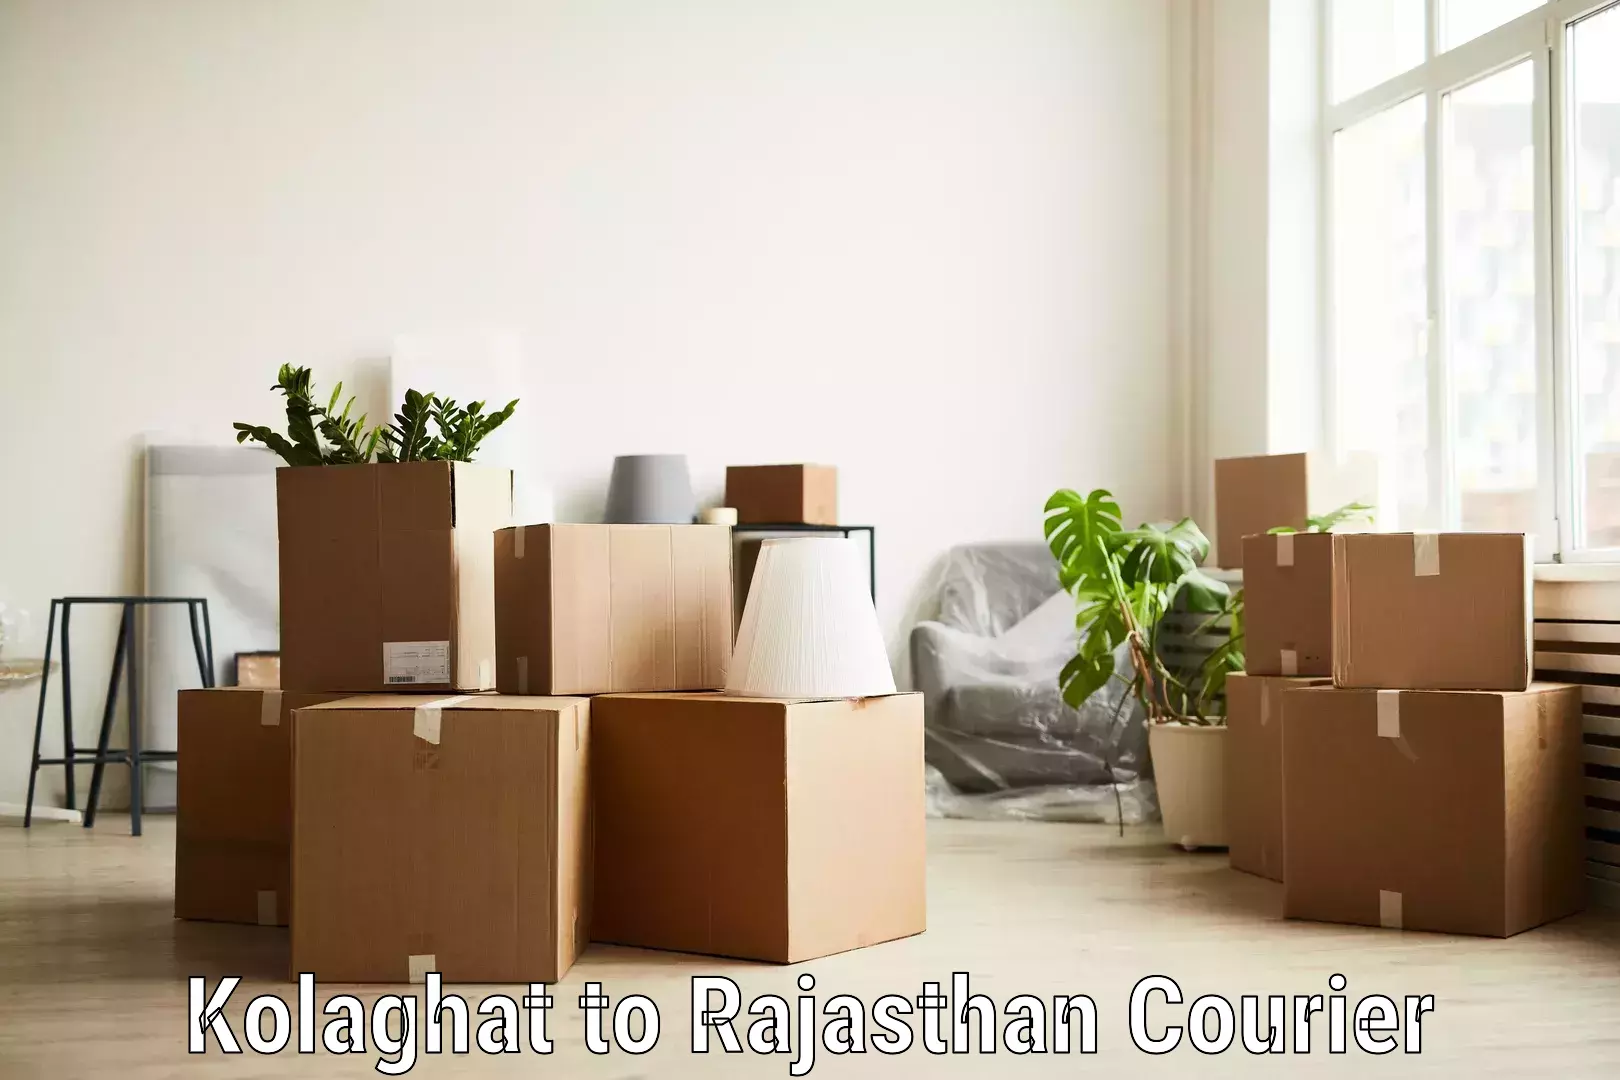 Expedited shipping solutions Kolaghat to Bari Dholpur